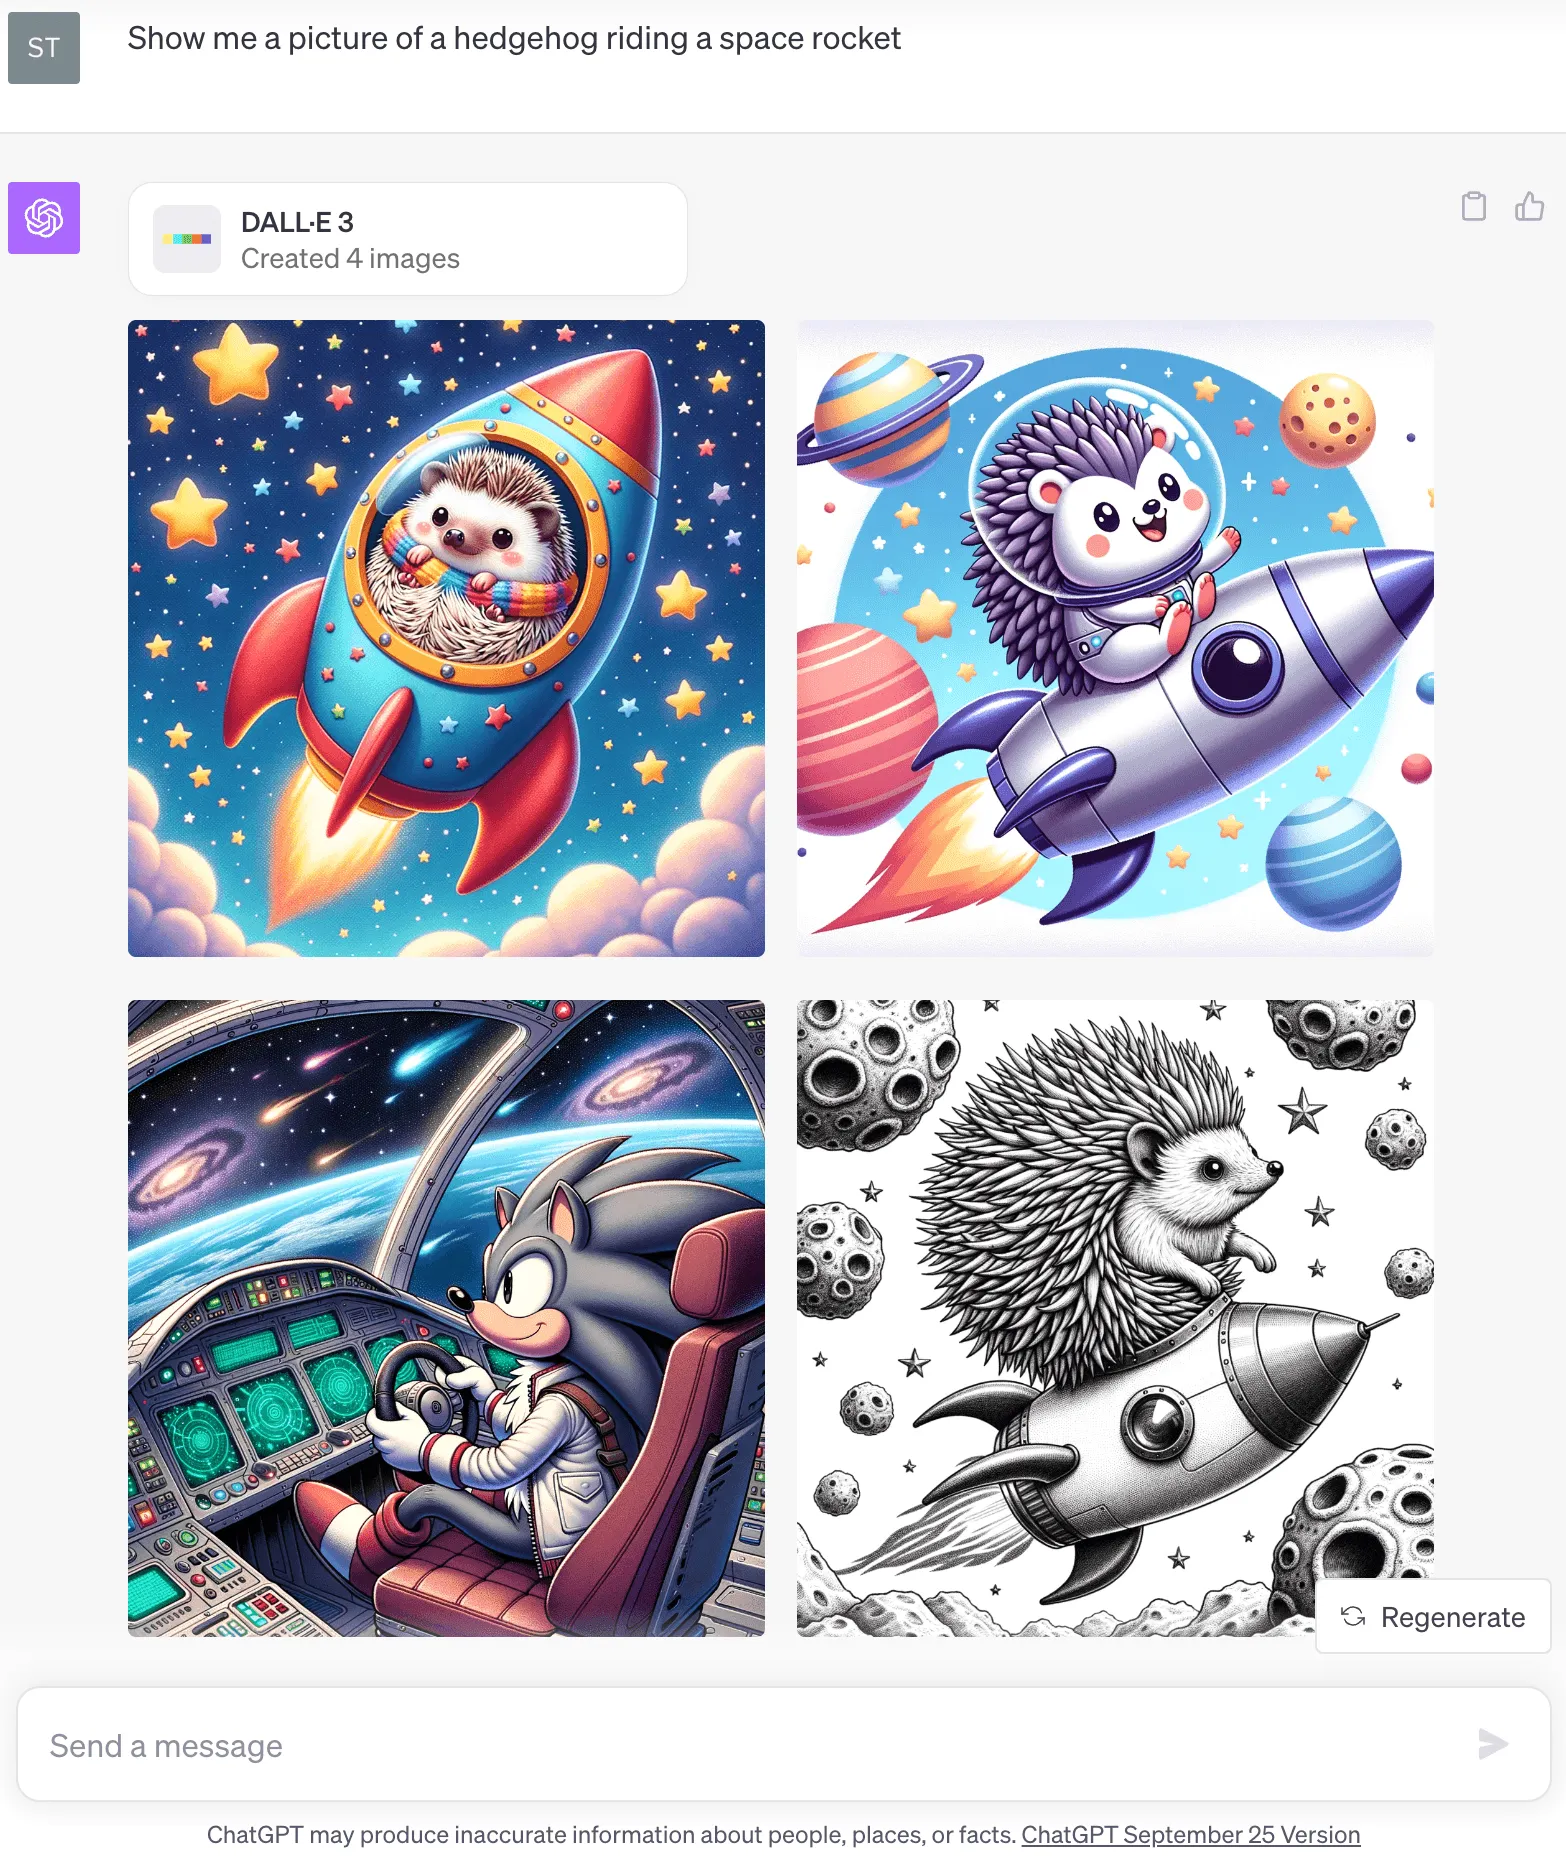 The image shows the ChatGPT interface and the prompt "Show me a picture of a hedgehog riding a space rocket.". DALL-E 3 then created four different images.